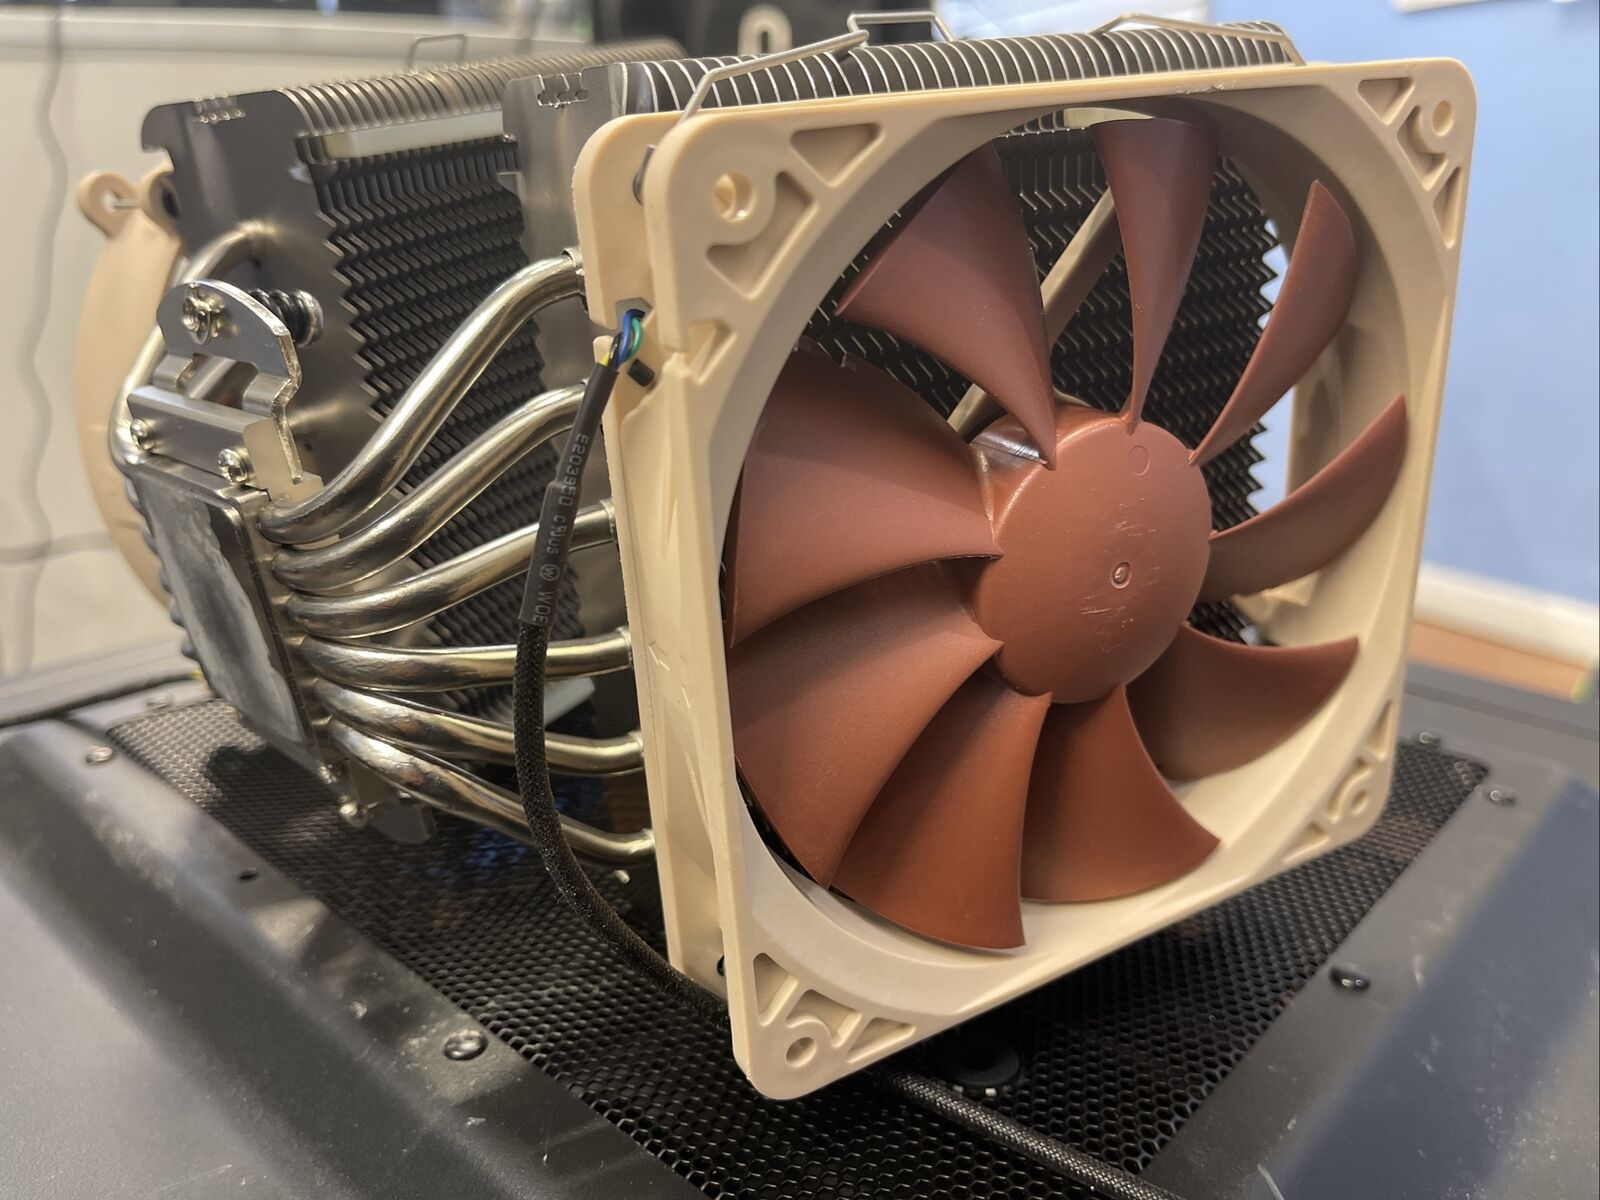 Noctua Nh-D14, Premium Cpu Cooler With Dual Nf-P14 Pwm And Nf-P12 Pwm Fans (Brow